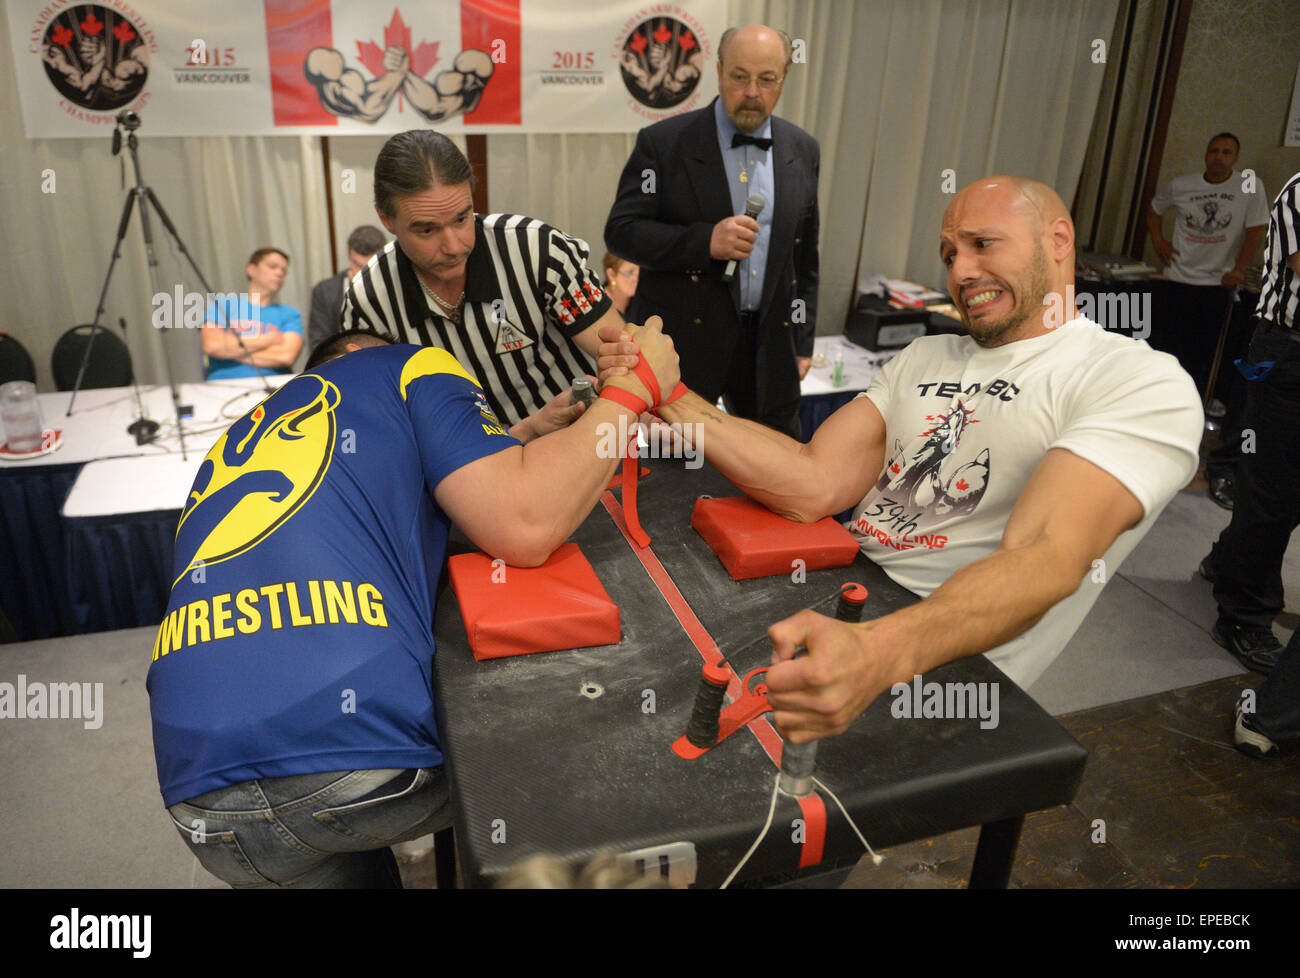 Vancouver, Canada. 17th May, 2015. Arm wrestlers compete during the 2015 Canadian Arm Wrestling Championships in Vancouver, Canada, May 17, 2015. Best Canadian arm wrestlers gathered here to battle for the trophy and champion title. Winners will represent Canada at the 2015 World Armwrestling Championships in September in Kuala Lumpur, Malaysia. © Sergei Bachlakov/Xinhua/Alamy Live News Stock Photo